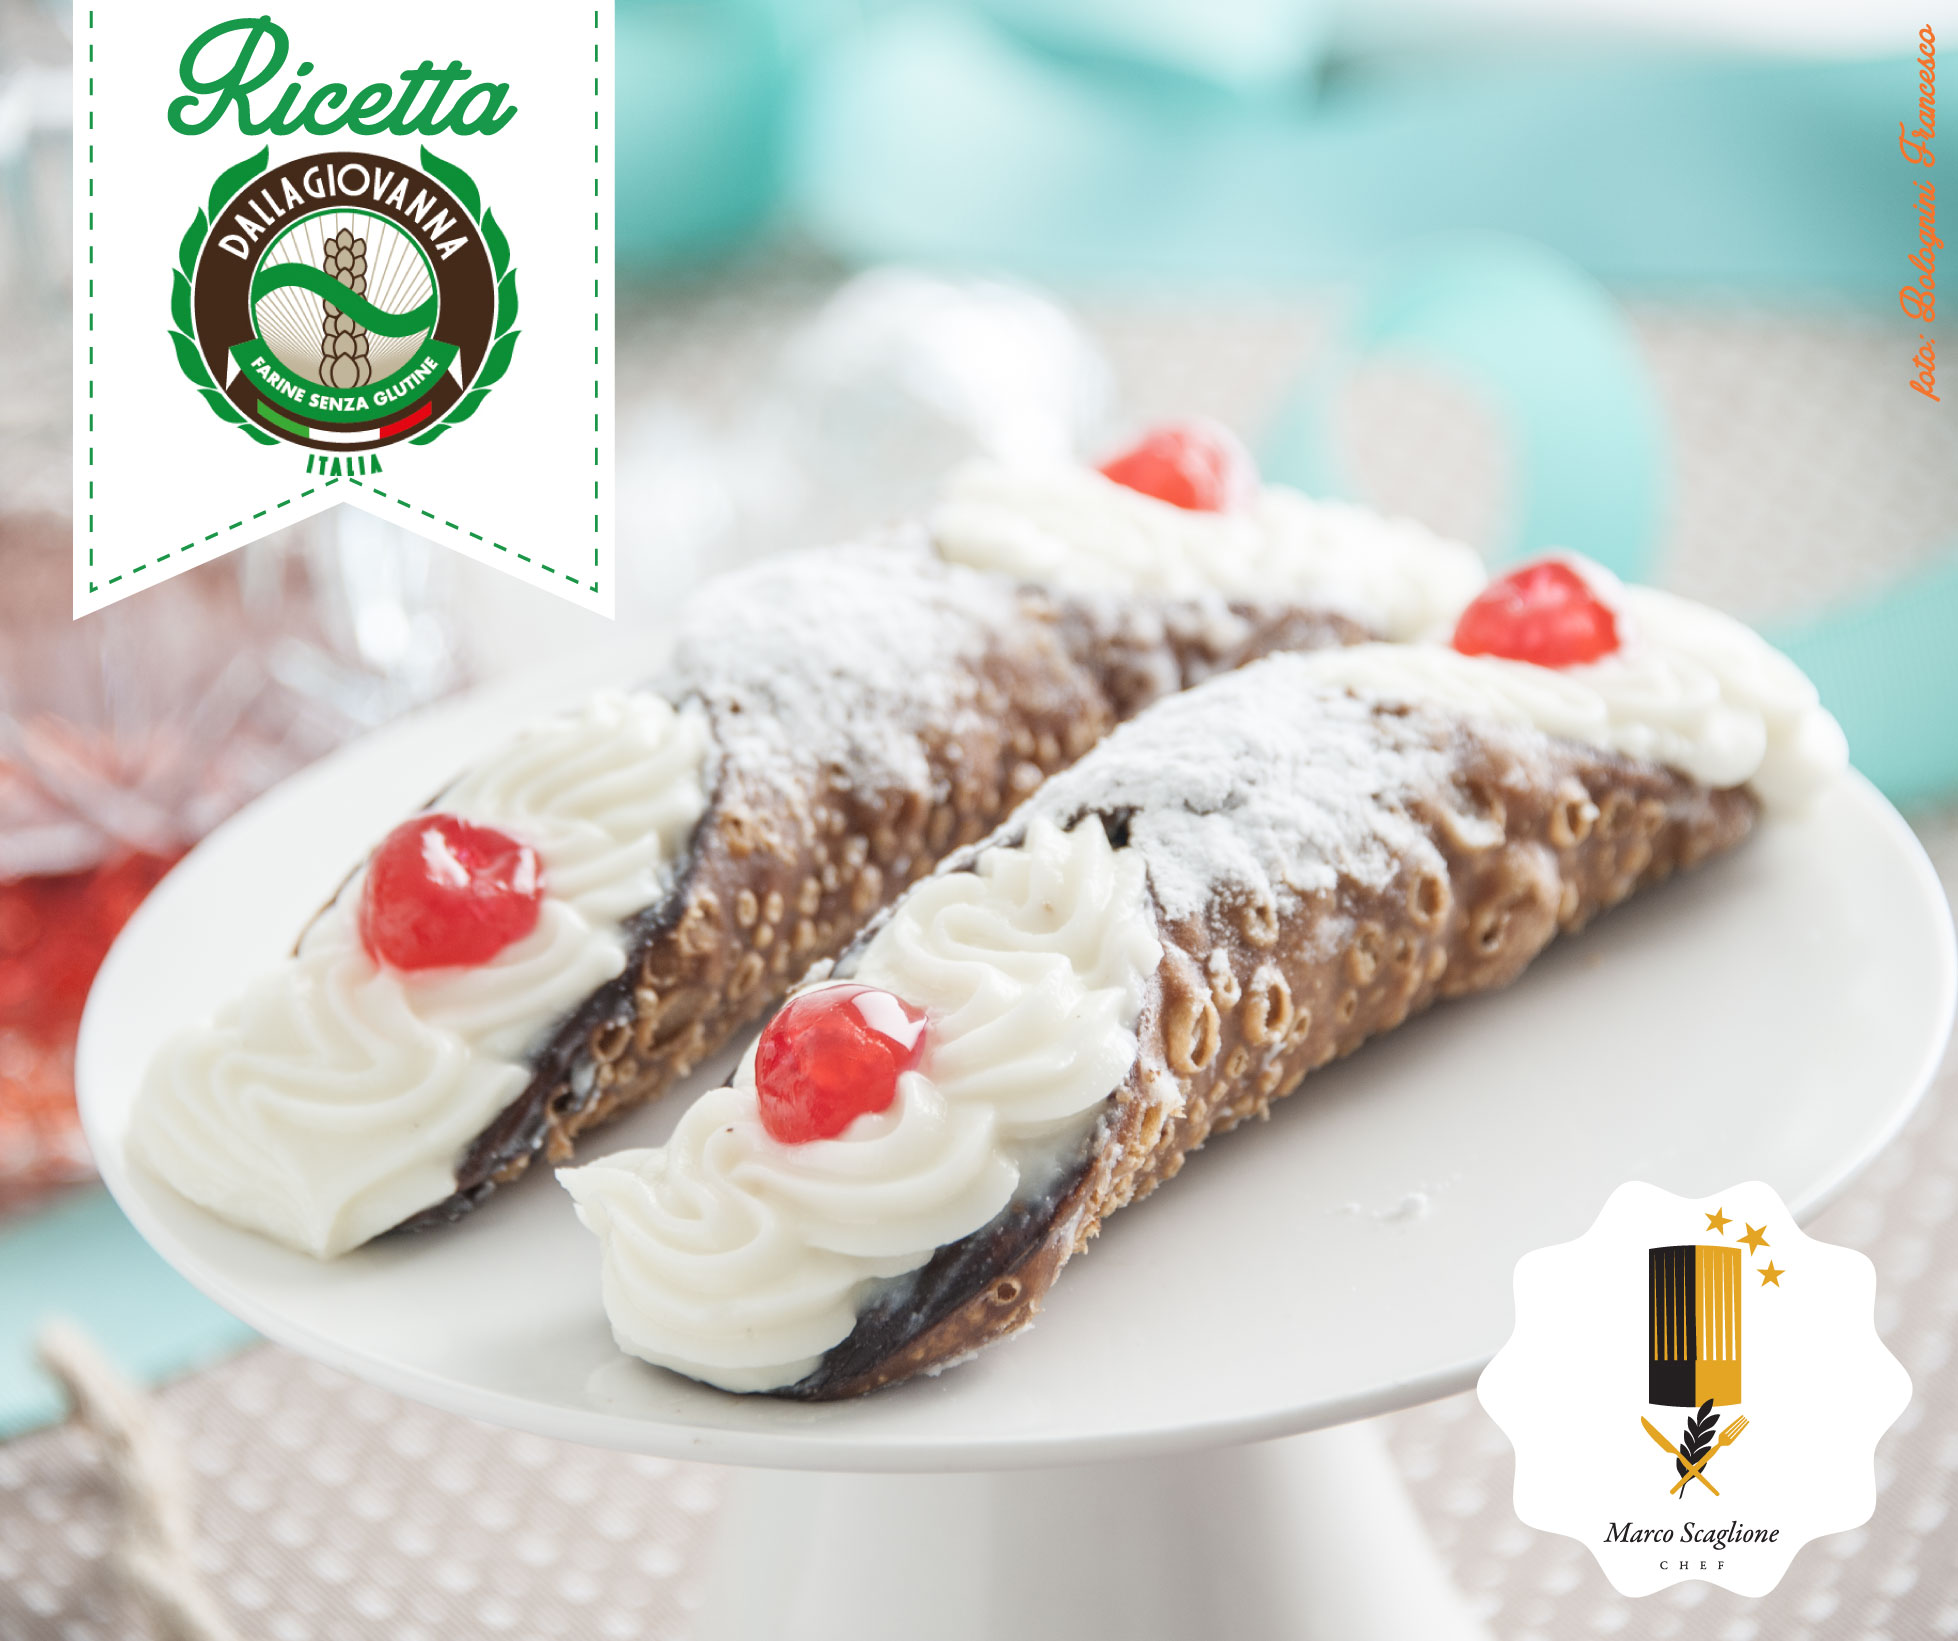  Gluten-free cannoli with sheep's ricotta and candied cherries